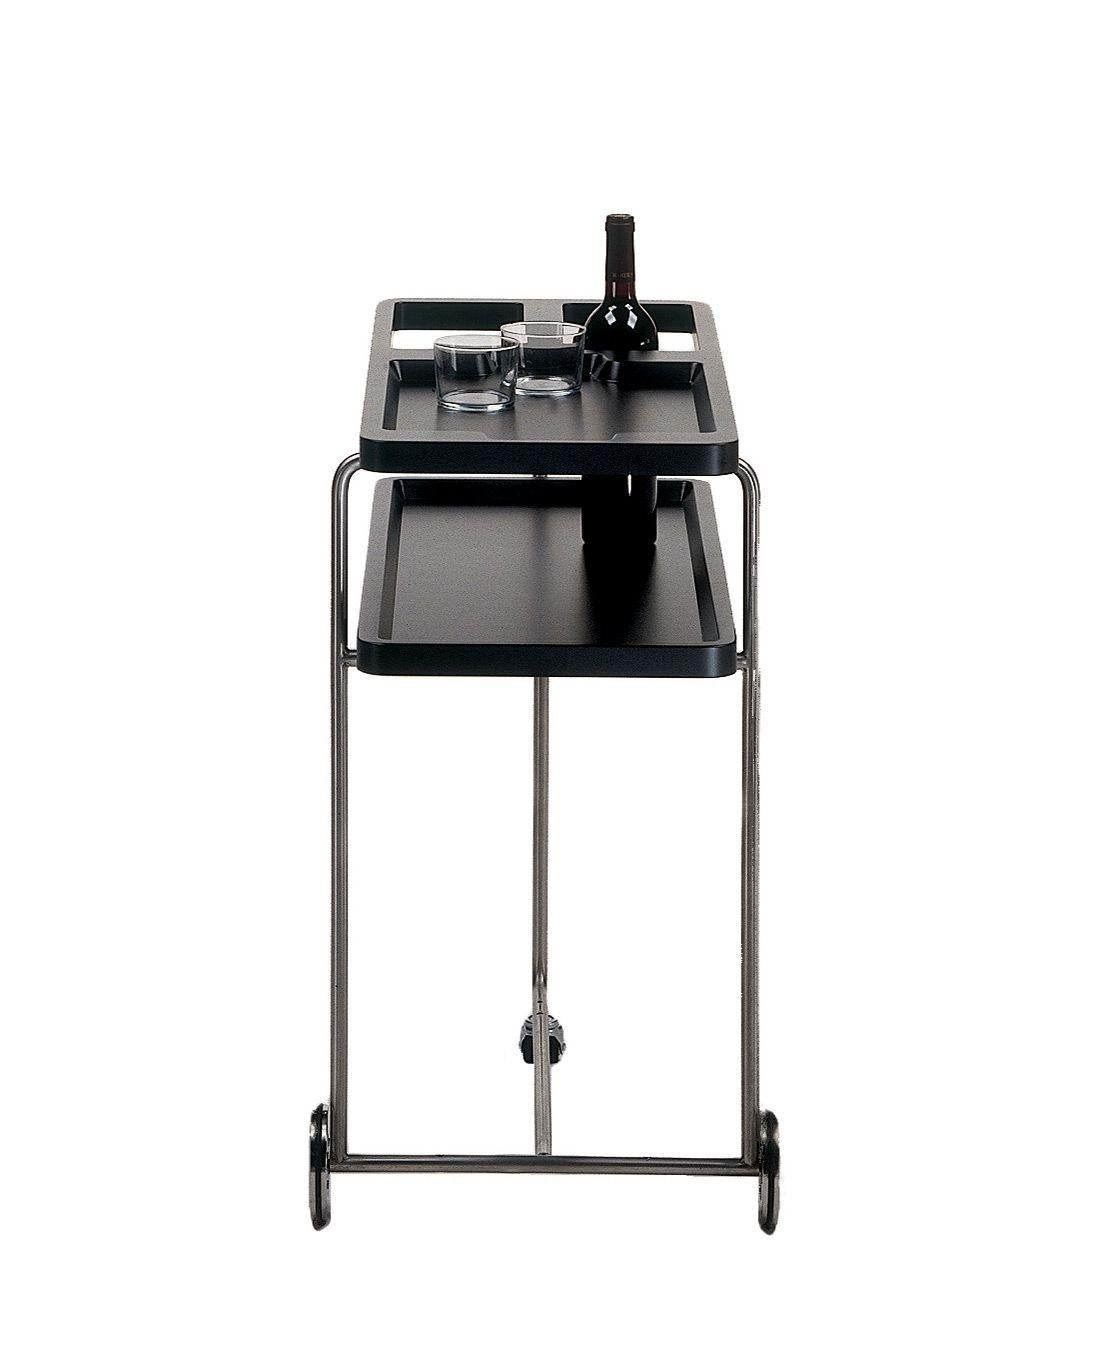 Black Happy Hour trolley by Alfredo Häberli
Dimensions: D 43 x W 91 x H 73 cm 
Materials: Chromed iron structure. Heat-shaped ABS+PMMA plastic trays, available painted with polyurethane micro-textured in matt white RAL 9003 or black RAL 9005. Back